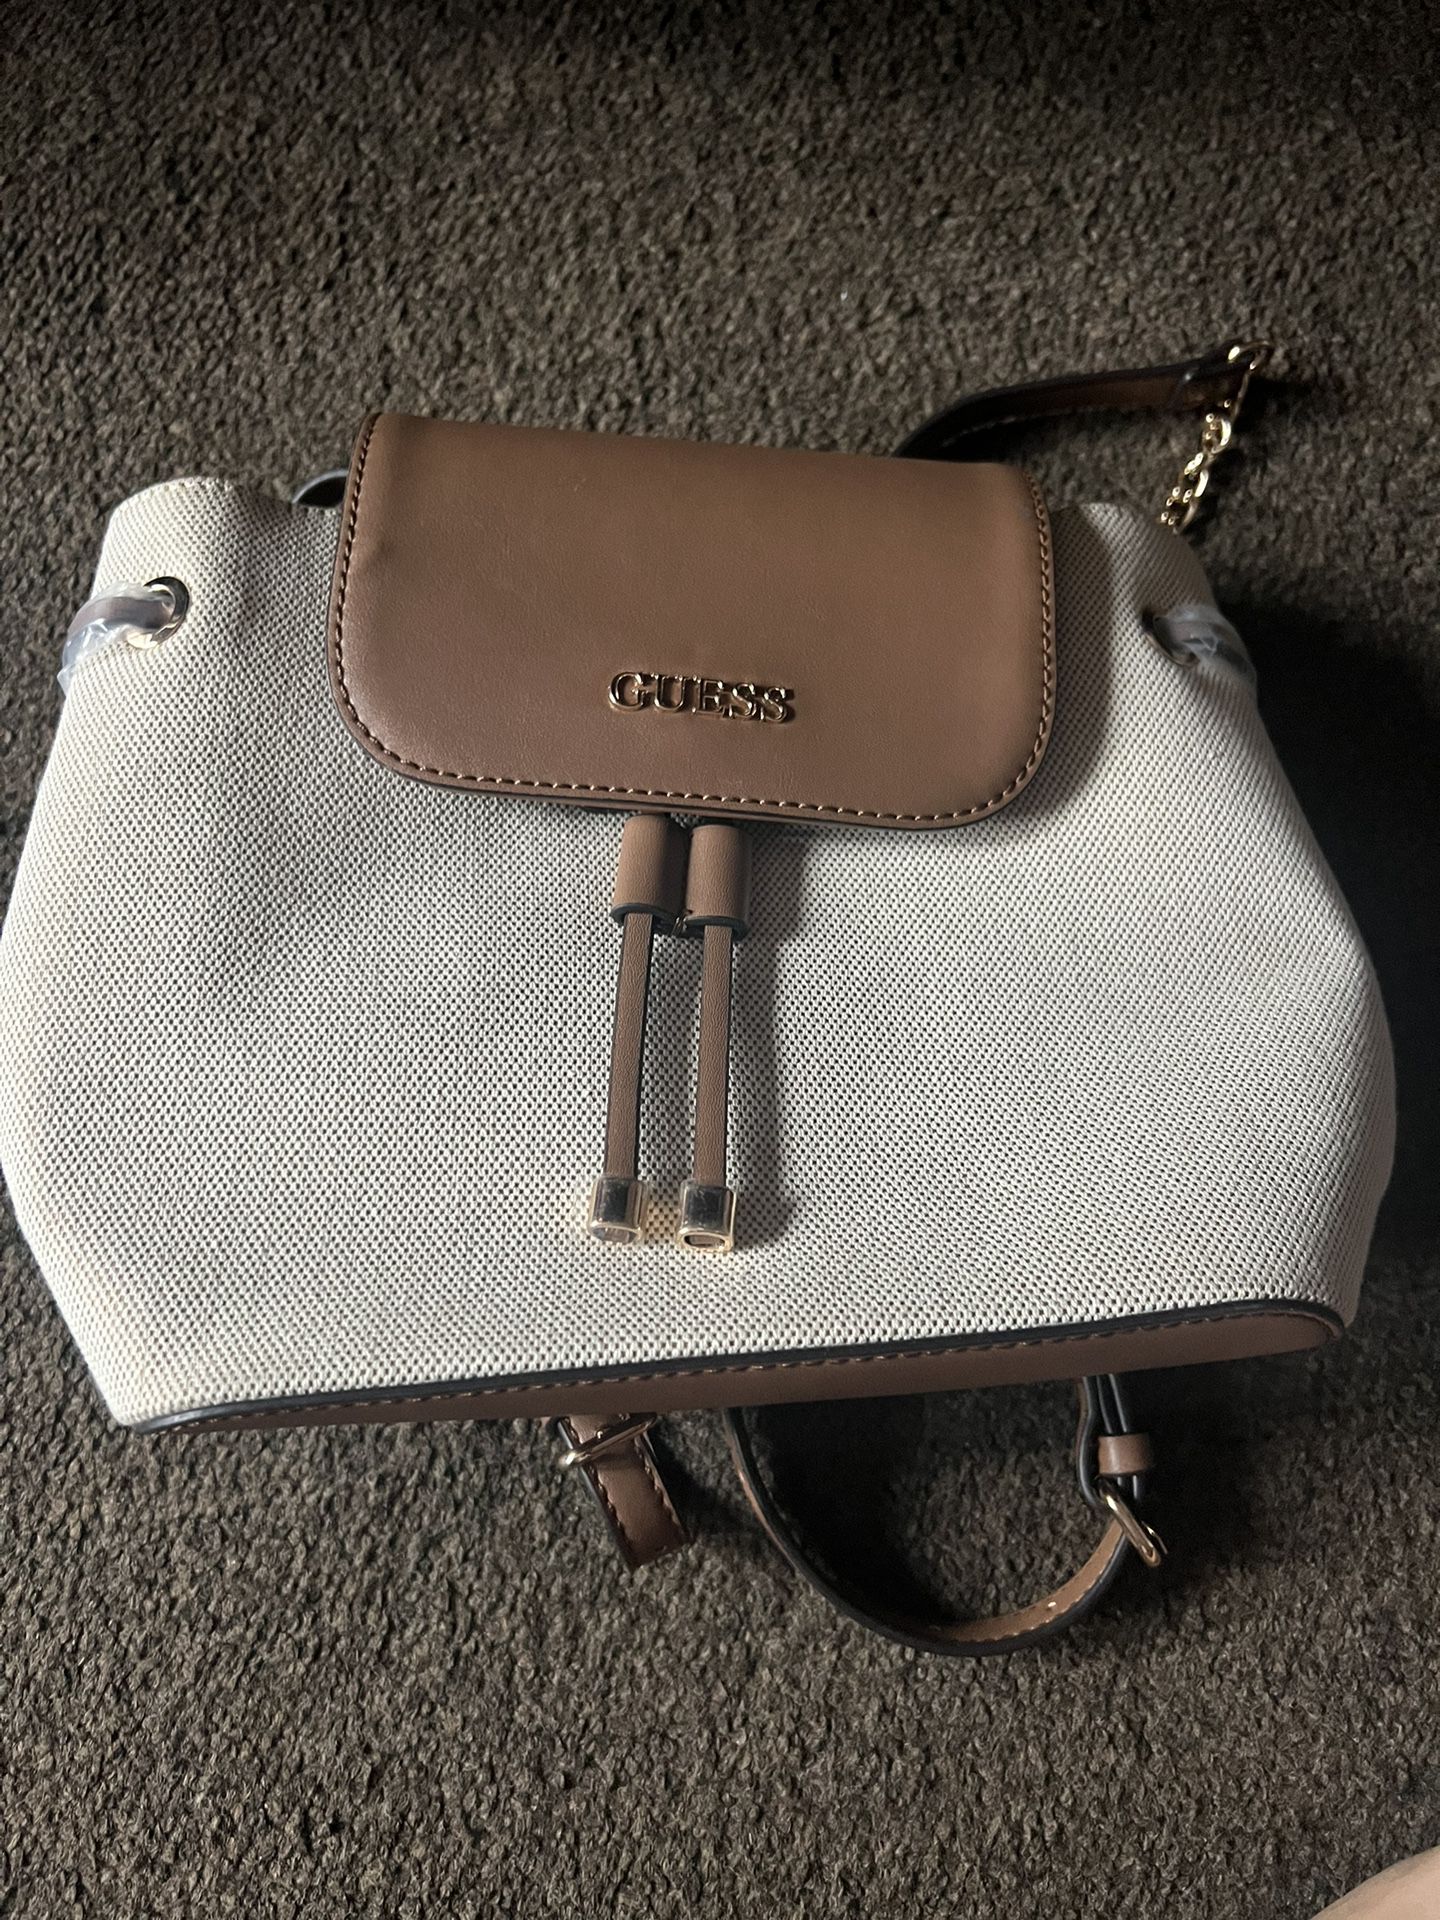 Guess Backpack. Brand New. 1 Small Stain 